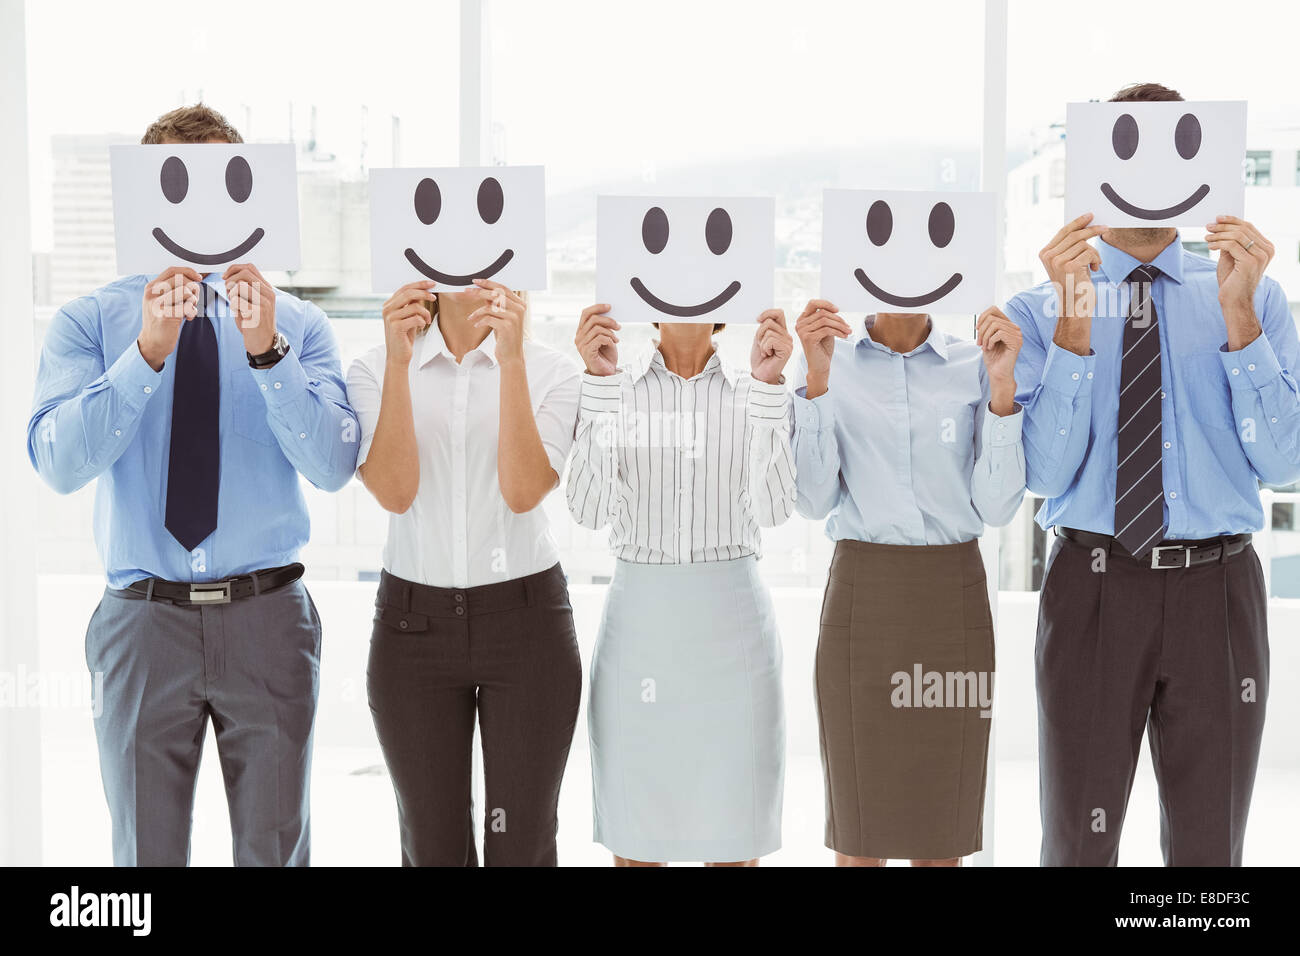 Business people holding happy smileys on faces Stock Photo